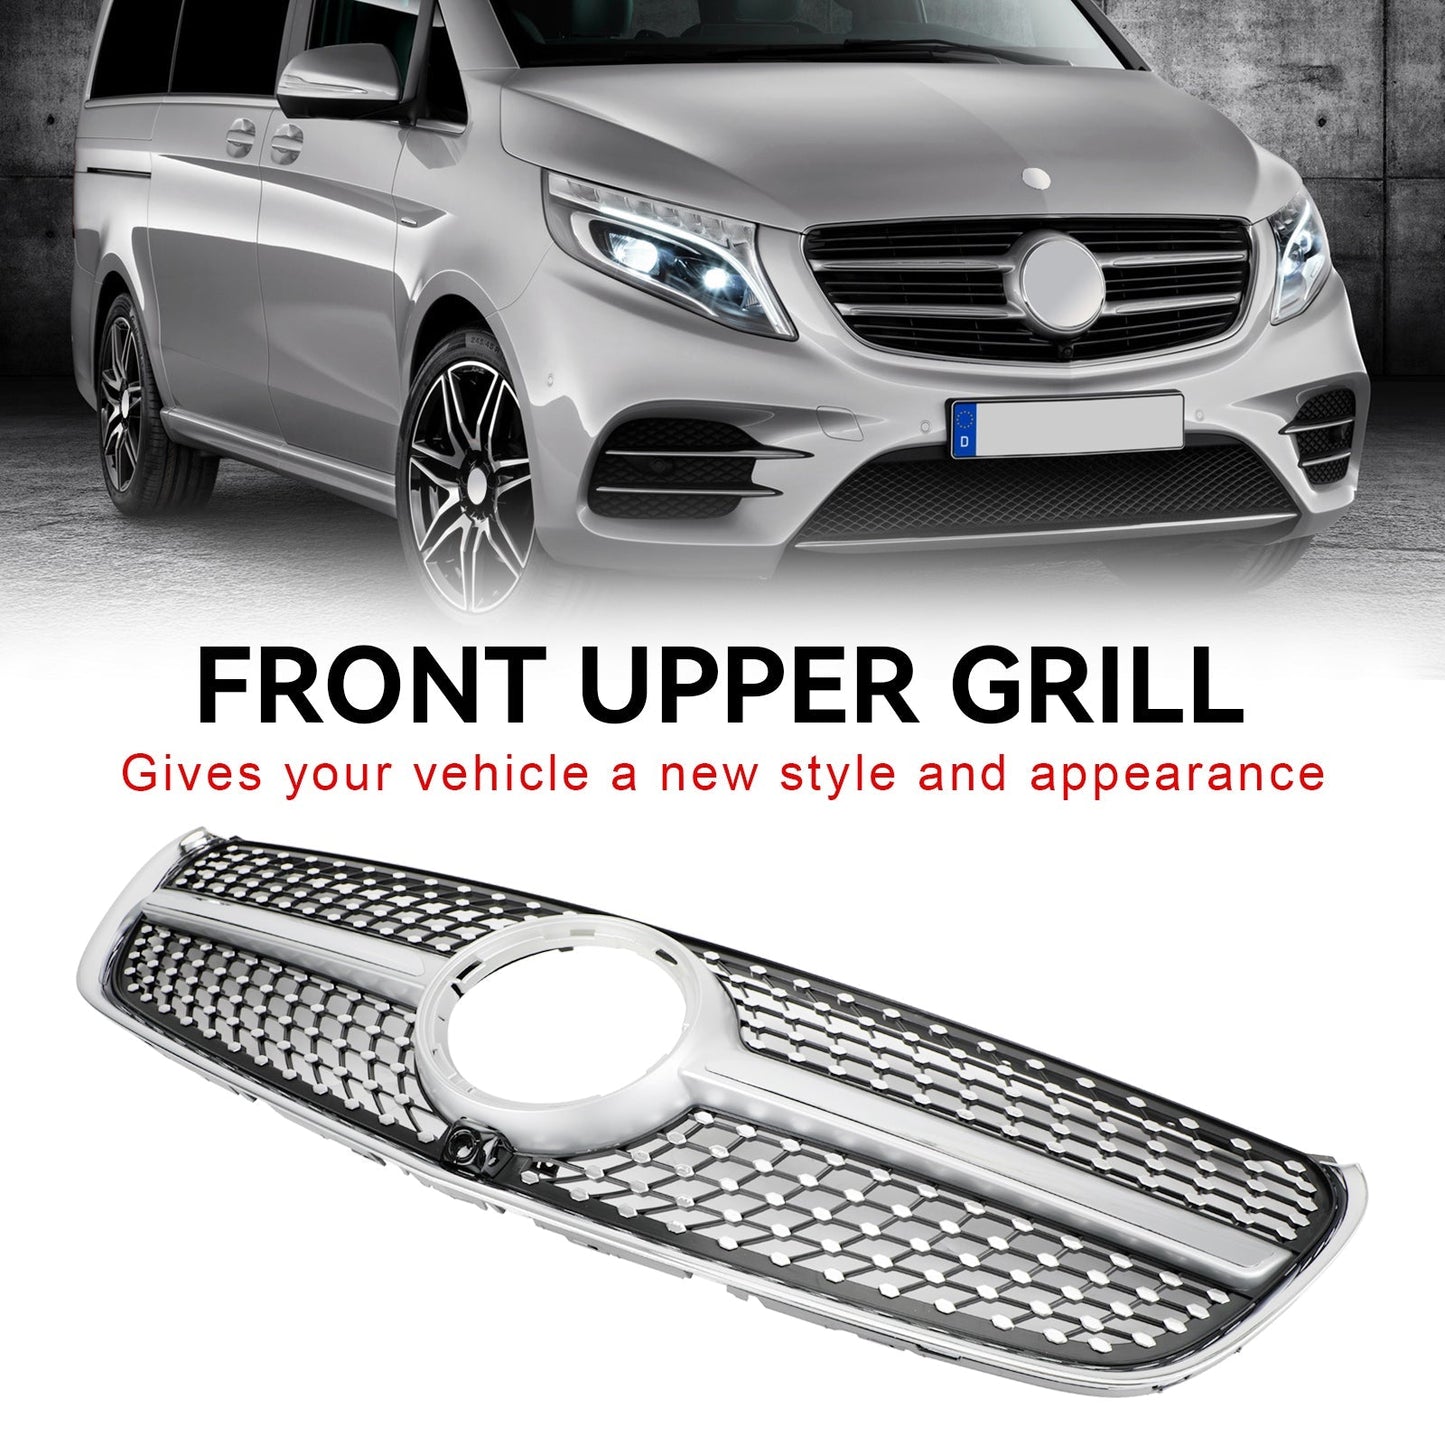 2014-2019 V Class W447 Benz Mercedes Grill Diamond Front Upper Grille Grill